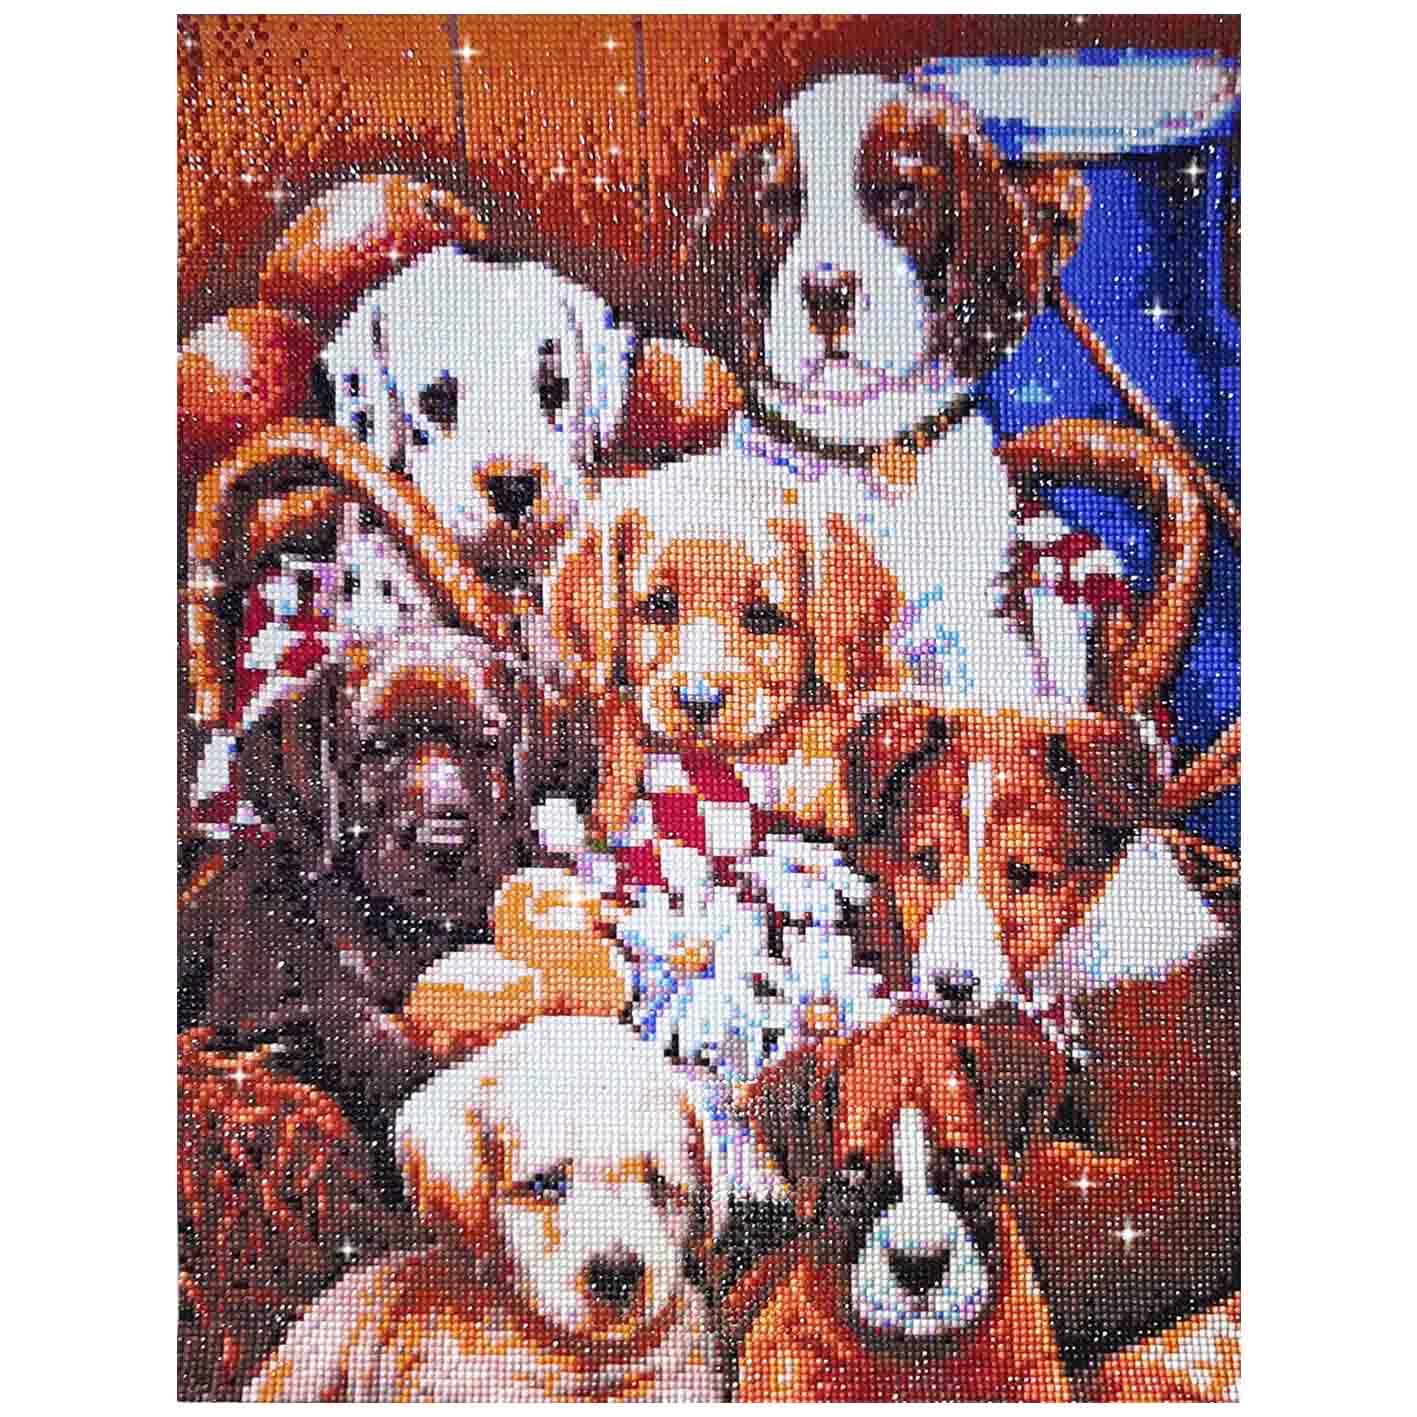 FINISHED DESIGN! PUPPY FAMILY 40*50cm